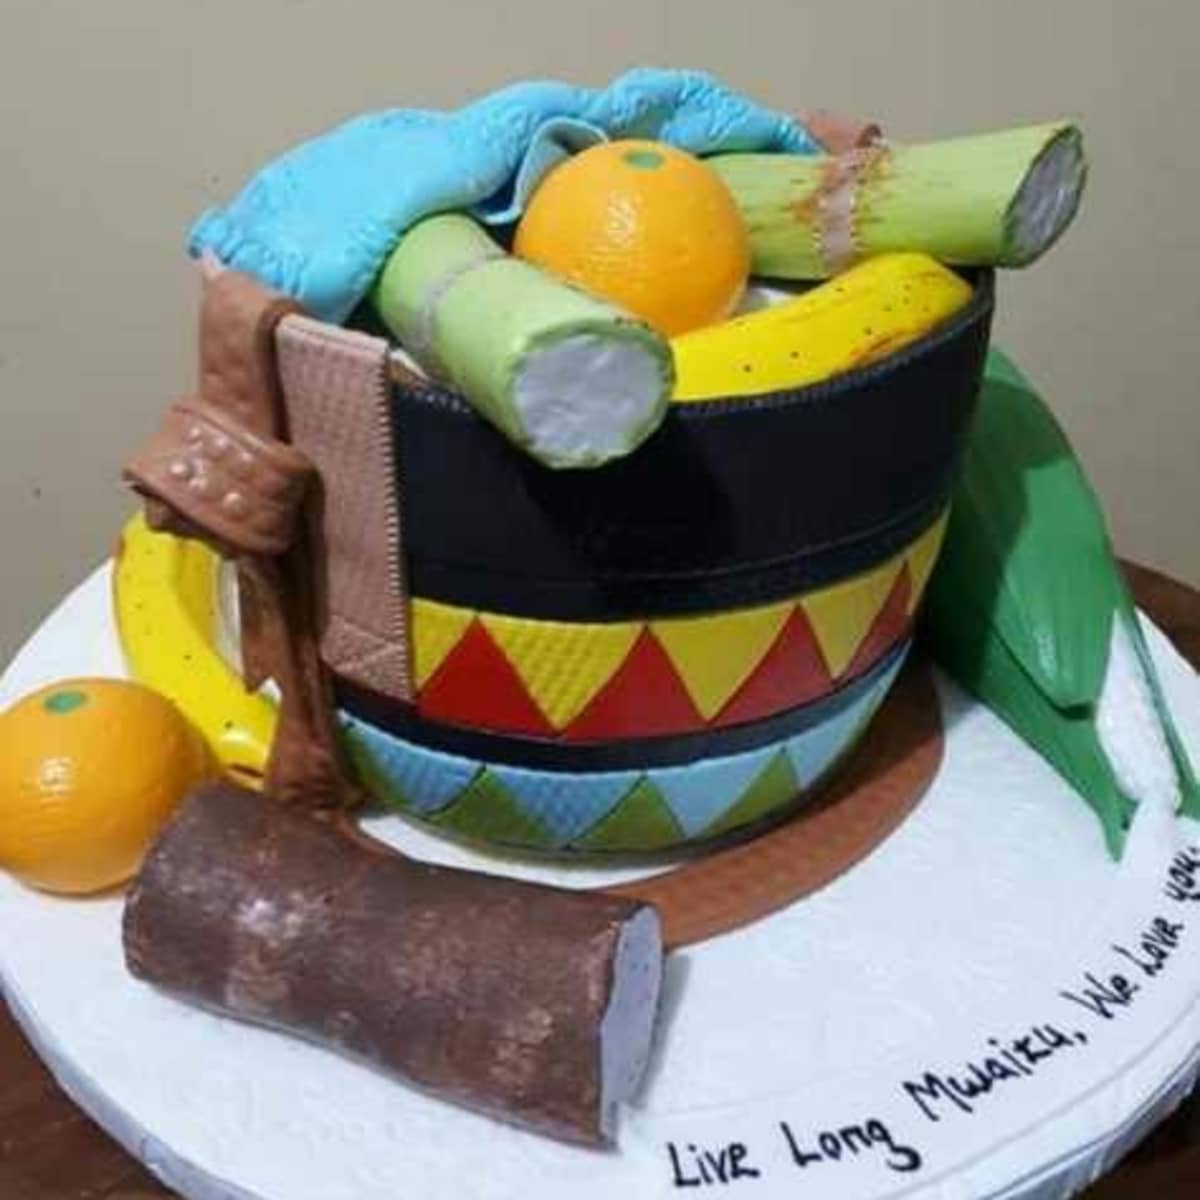 10 Unbelievable candy-covered cakes that will make your jaw drop - Food24